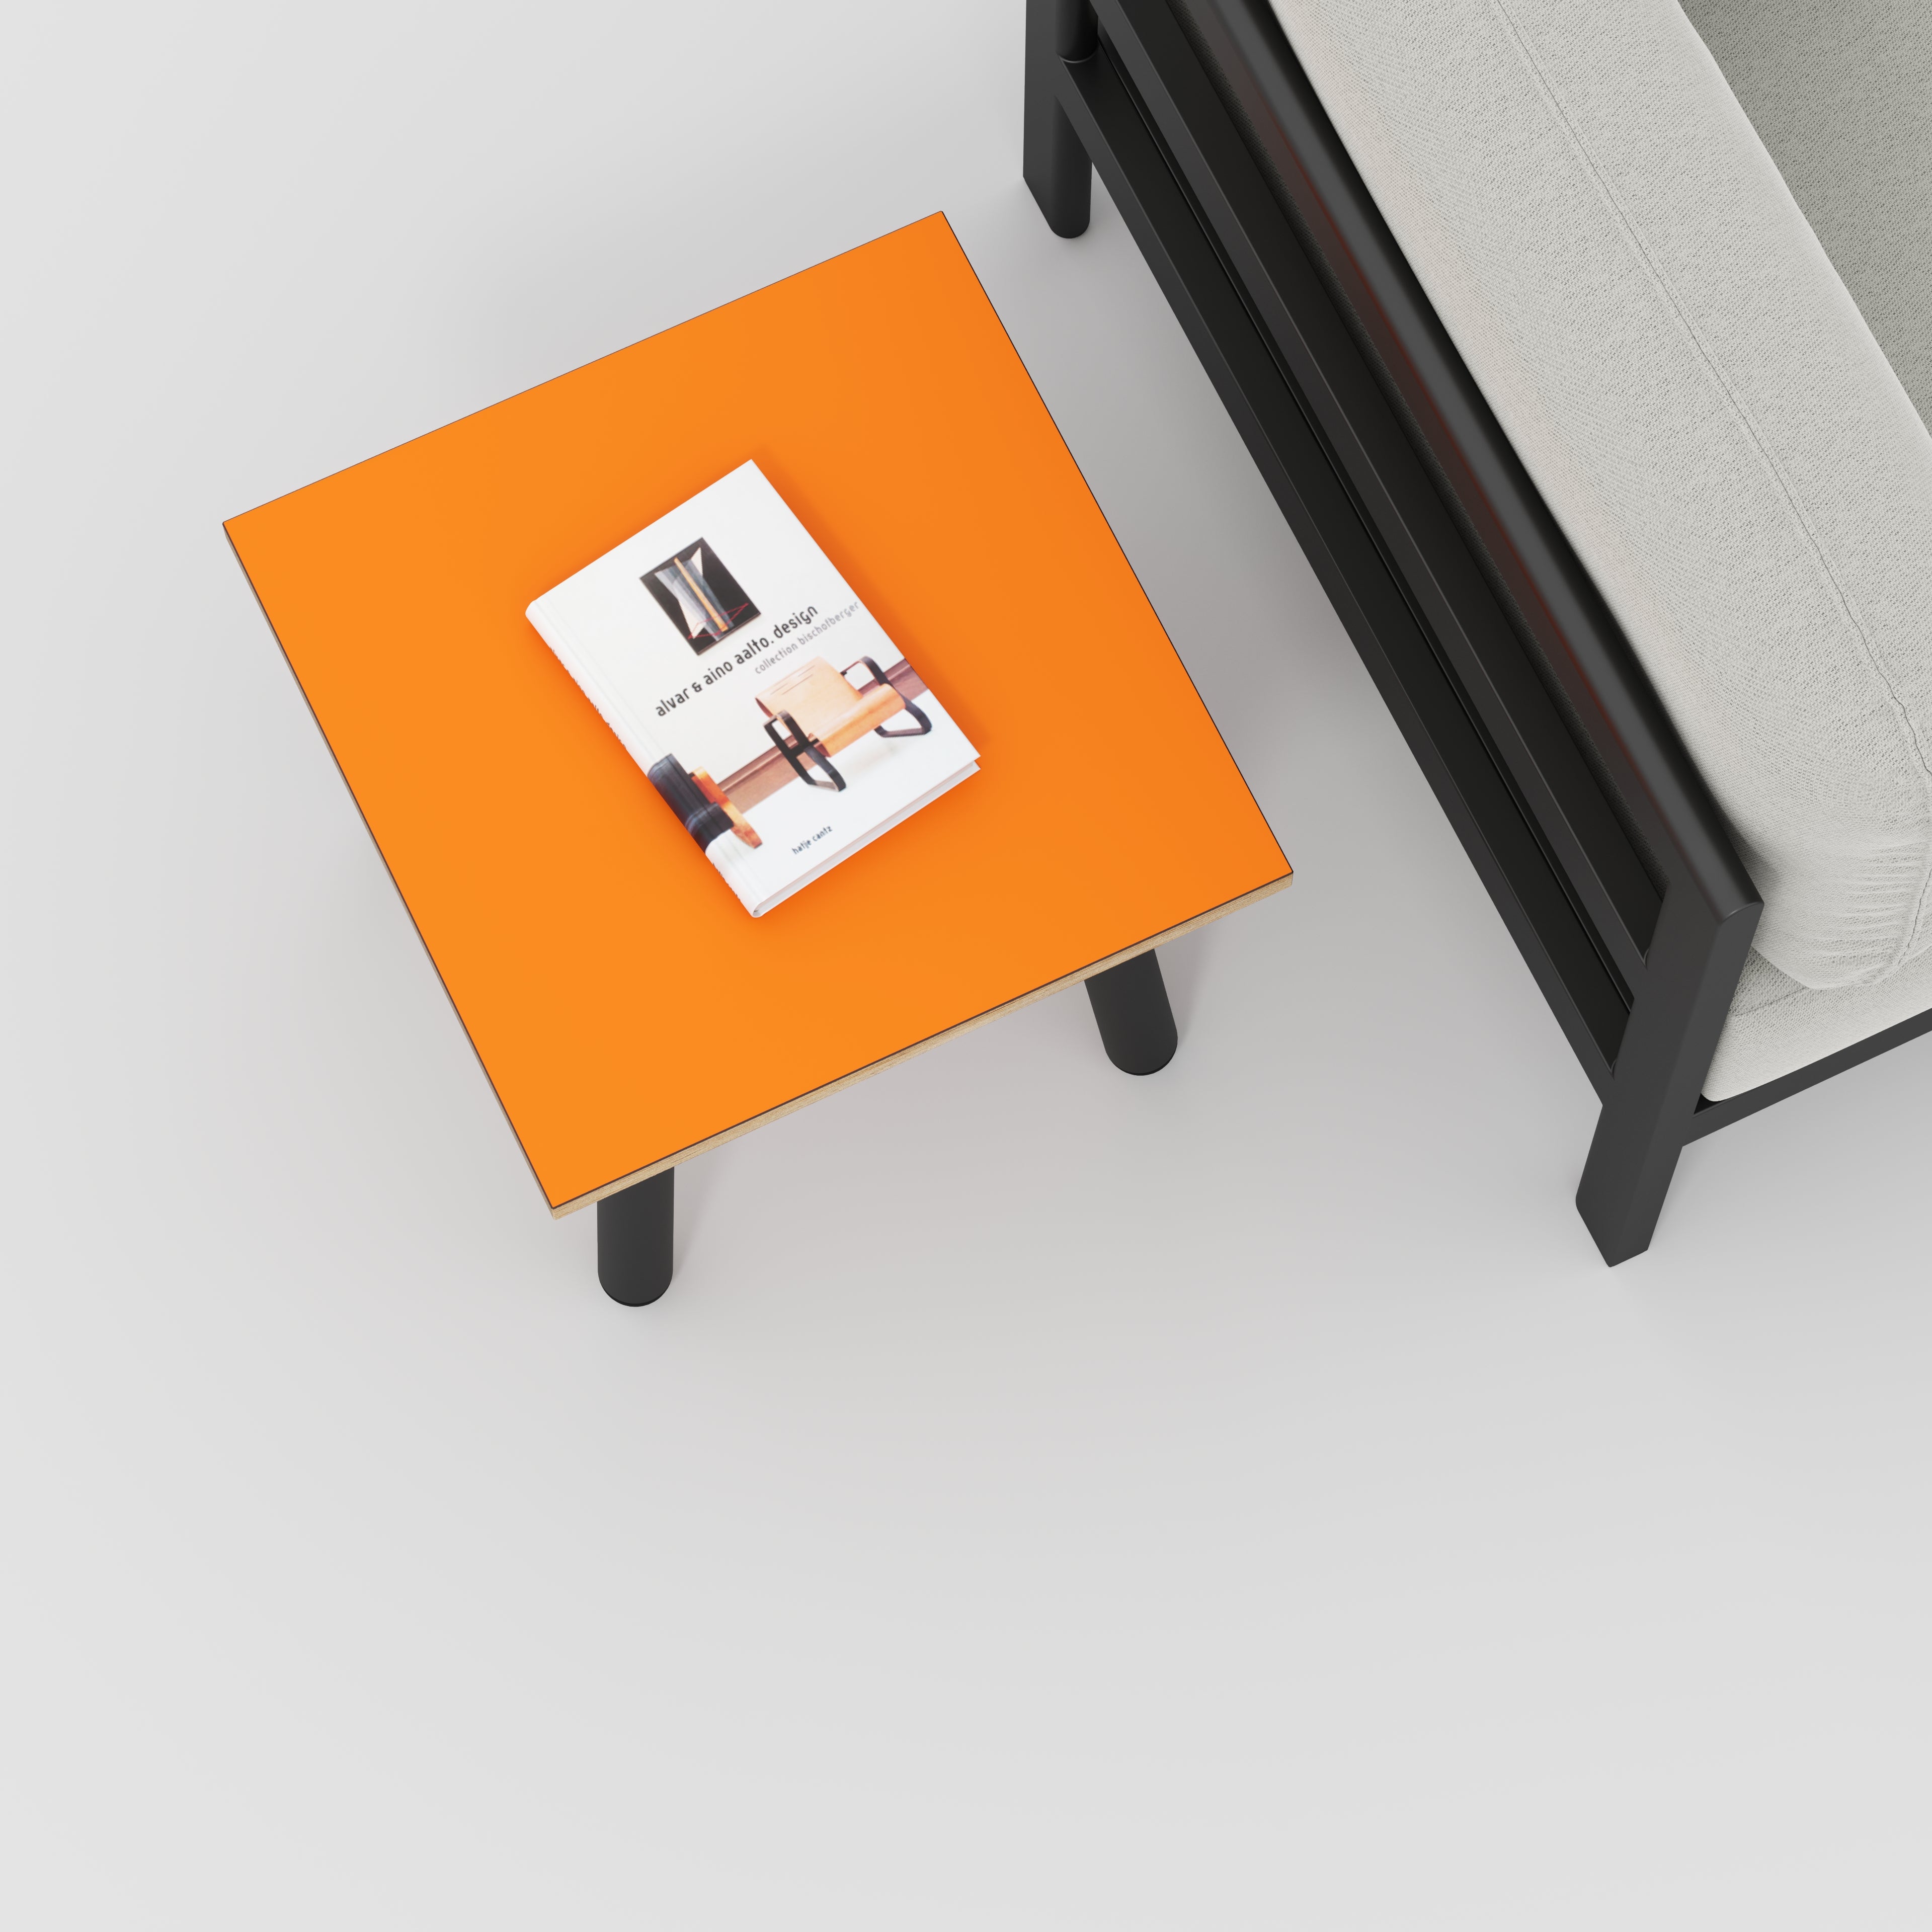 Side Table with Round Single Pin Legs - Formica Levante Orange - 500(w) x 500(d) x 425(h)